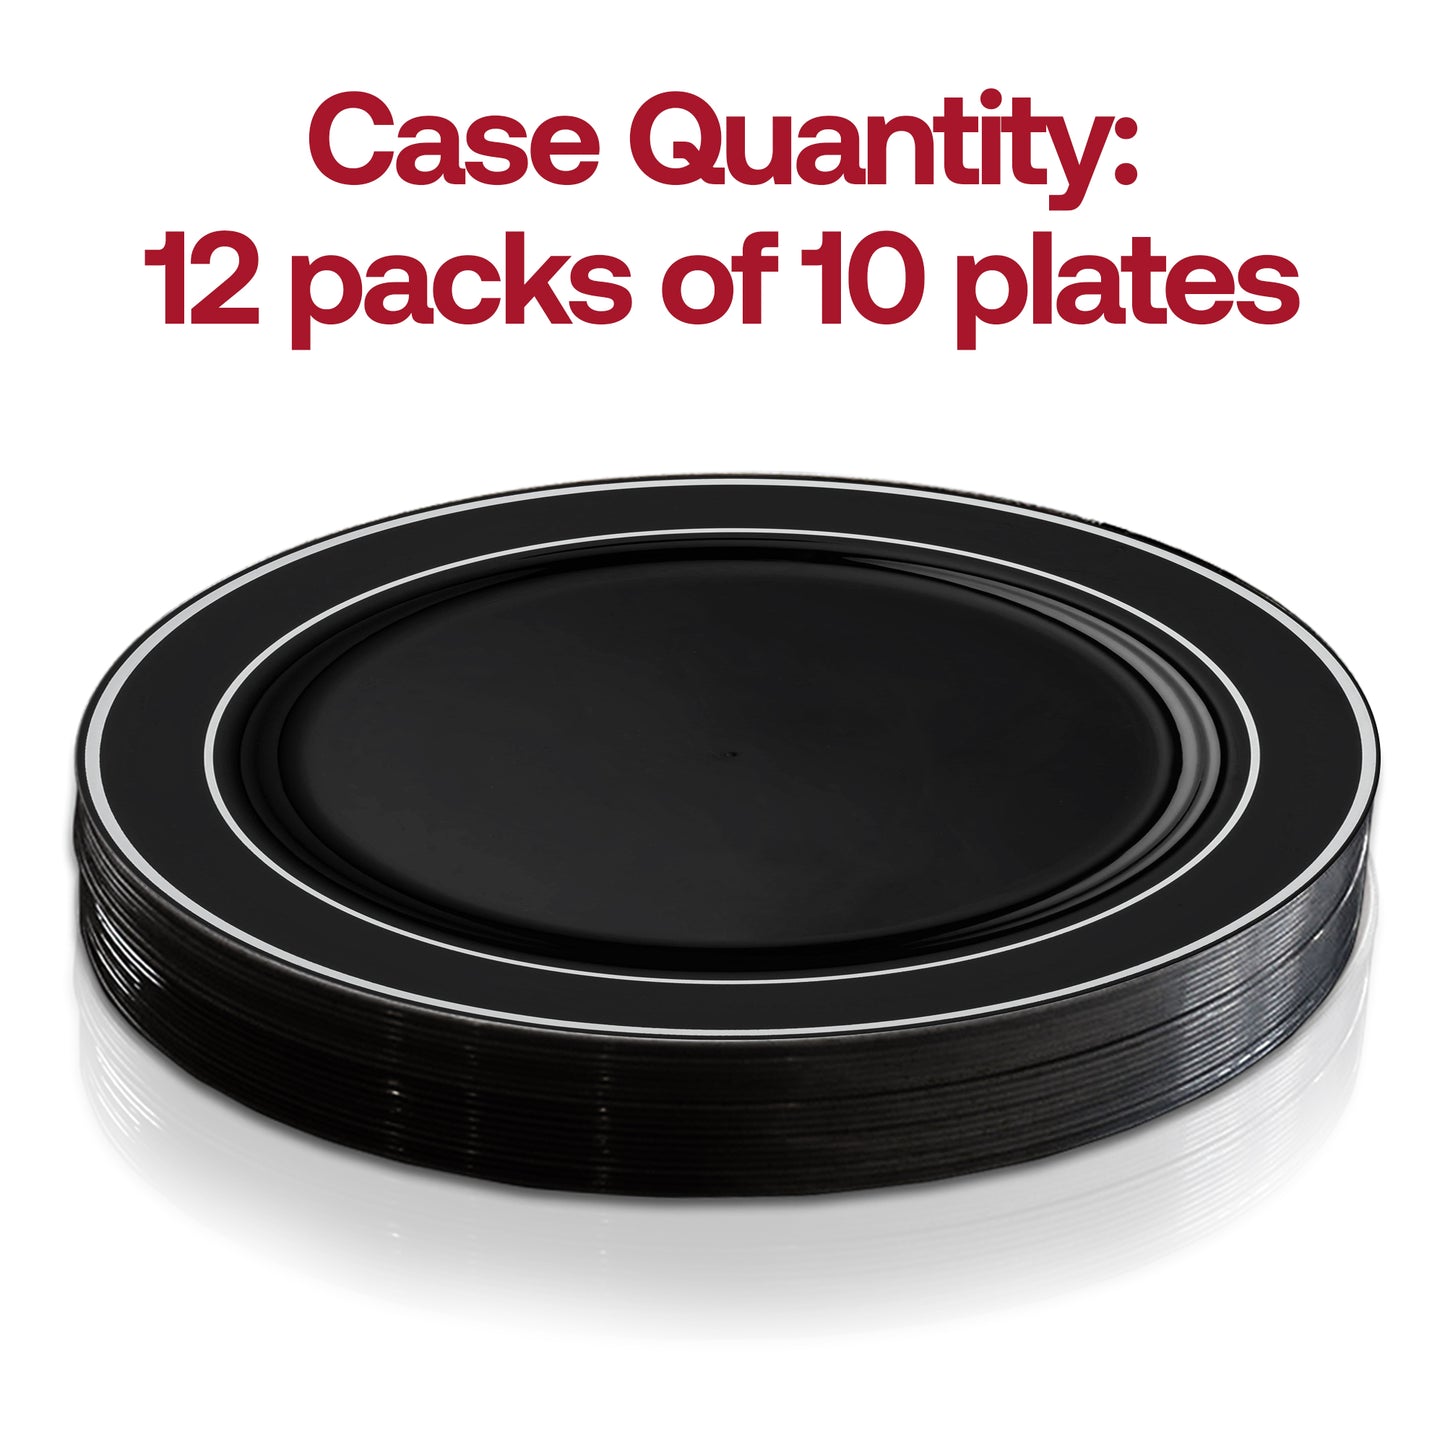 Black with Silver Edge Rim Plastic Appetizer/Salad Plates (7.5") Quantity | The Kaya Collection